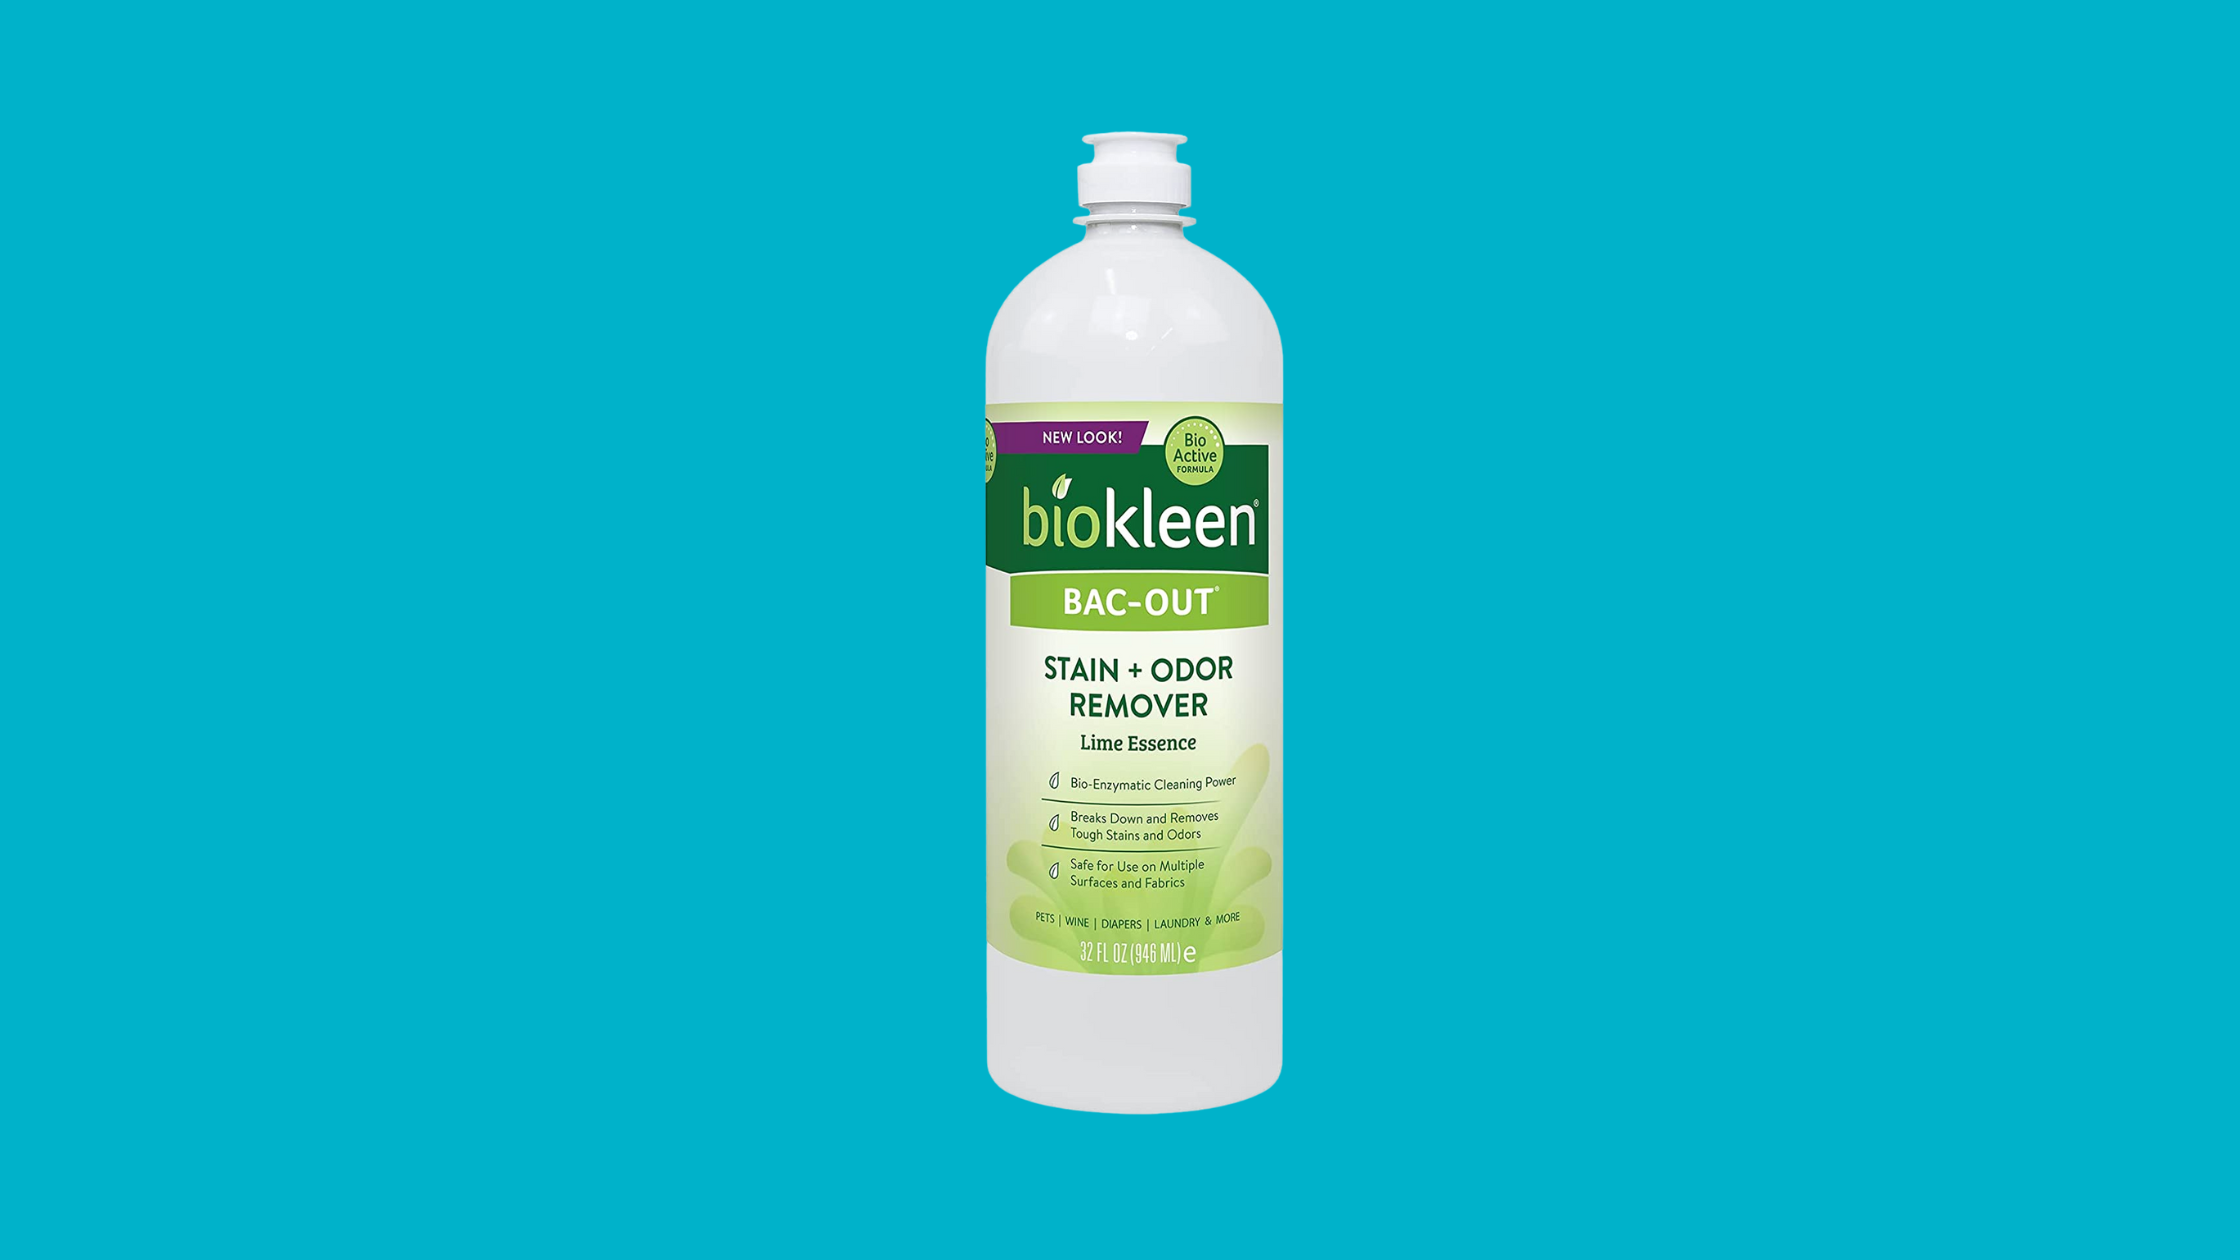 Biokleen Bac-Out Stain and Odor Remover